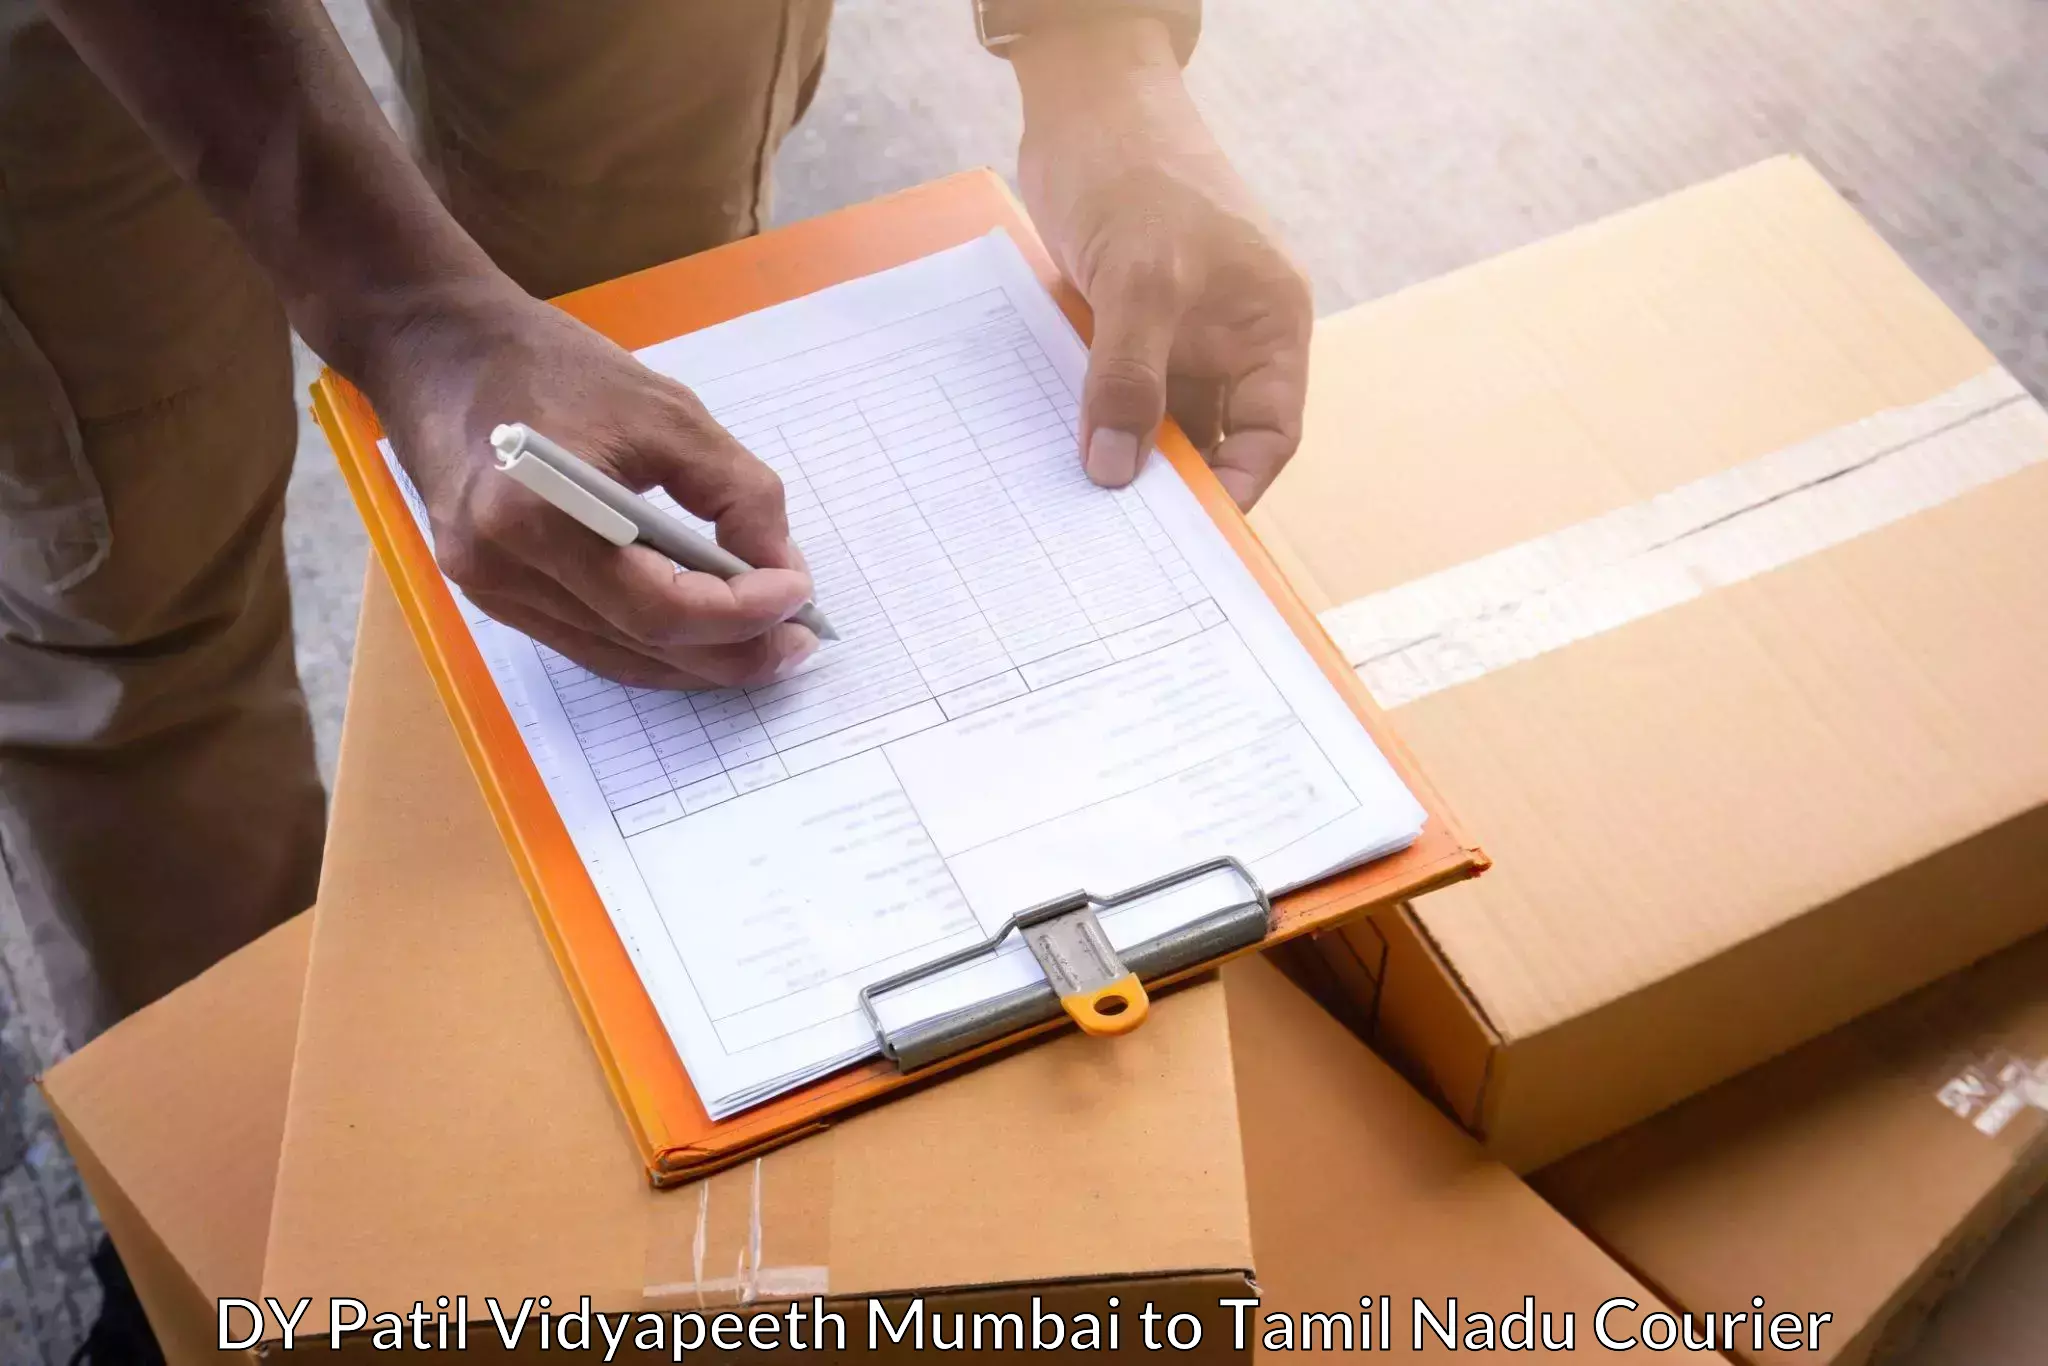 Optimized shipping services in DY Patil Vidyapeeth Mumbai to Sivaganga